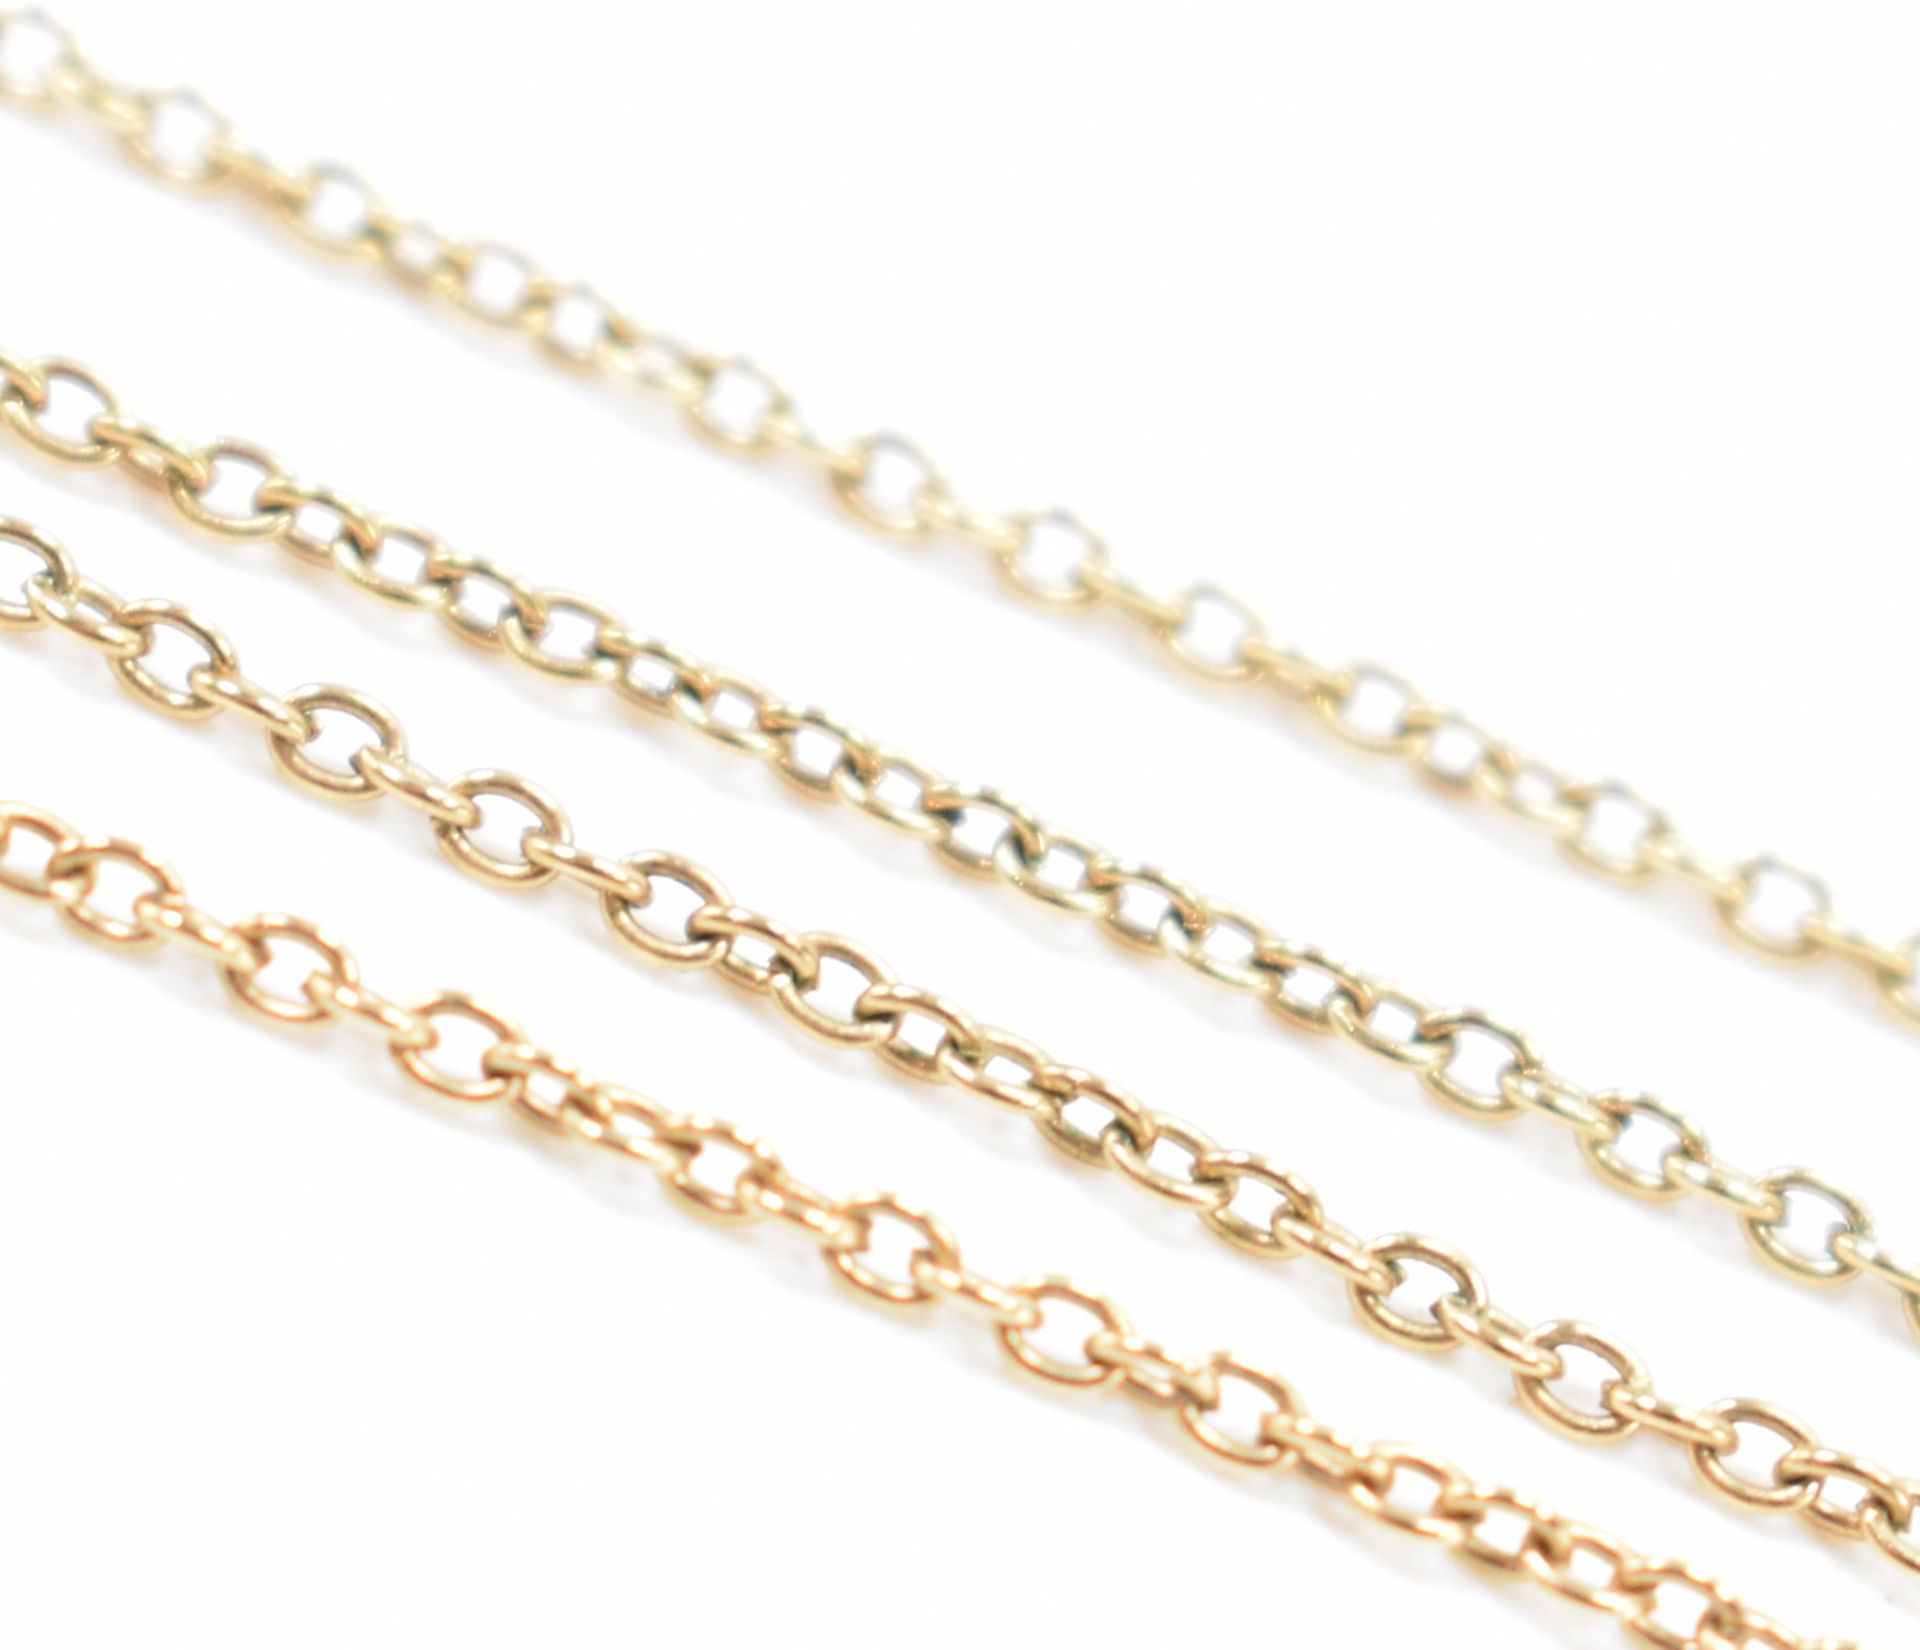 GOLD CHAIN NECKLACE - TESTS INDICATE 9CT GOLD - Image 3 of 4